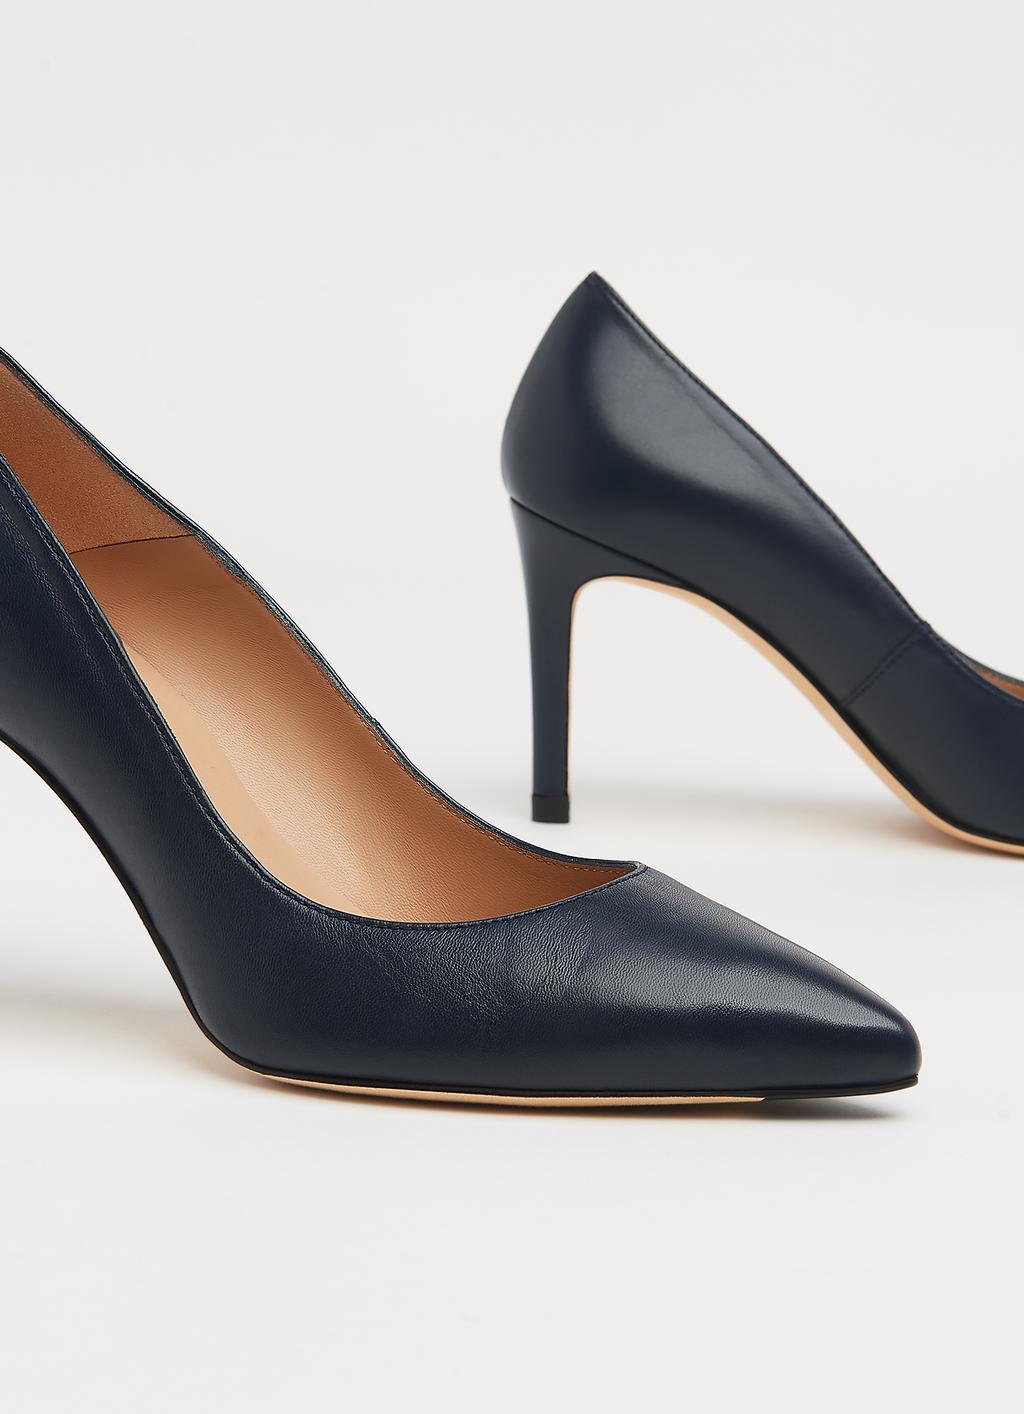 Floret Navy Leather Pointed Toe Courts | Shoes | L.K.Bennett